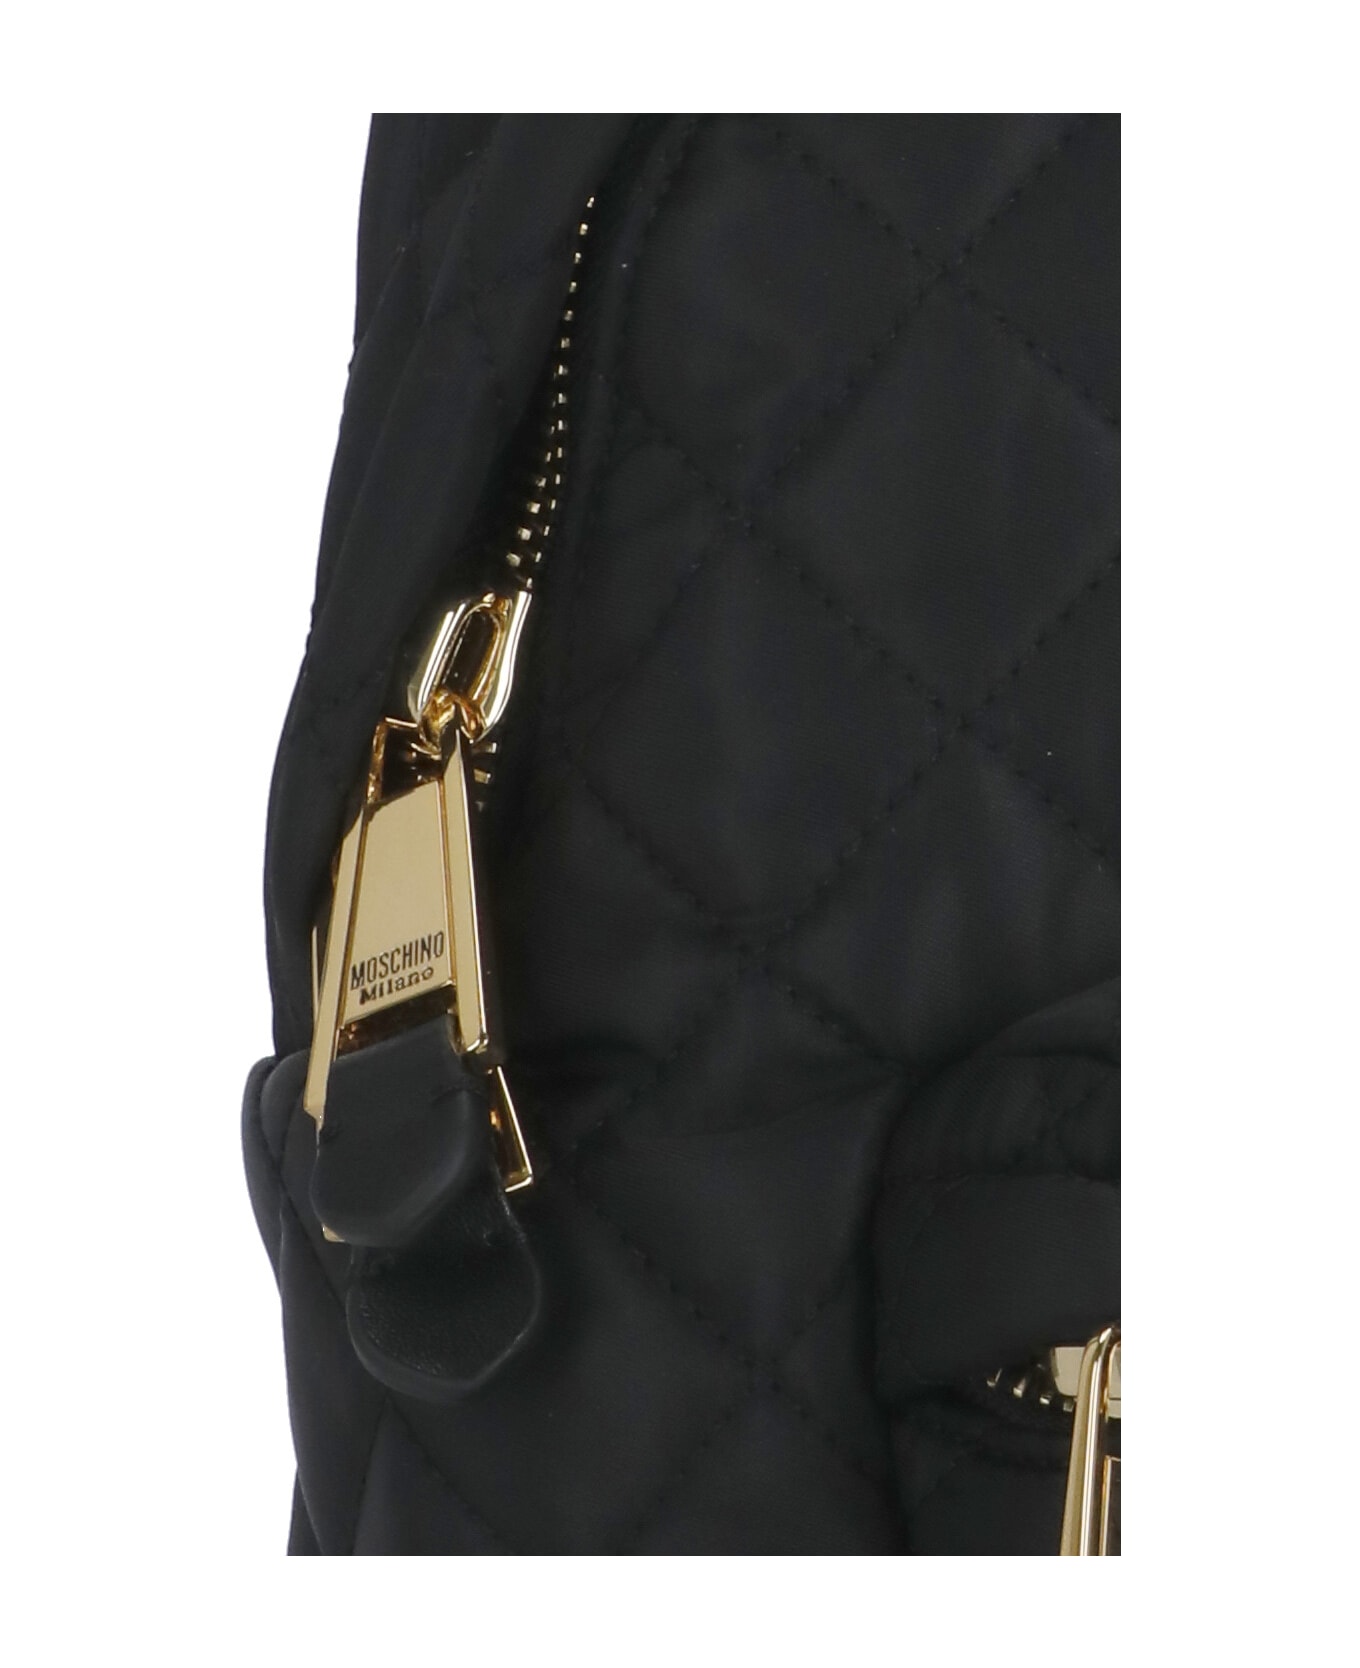 Moschino Quilted Backpack With Logo - Black バックパック